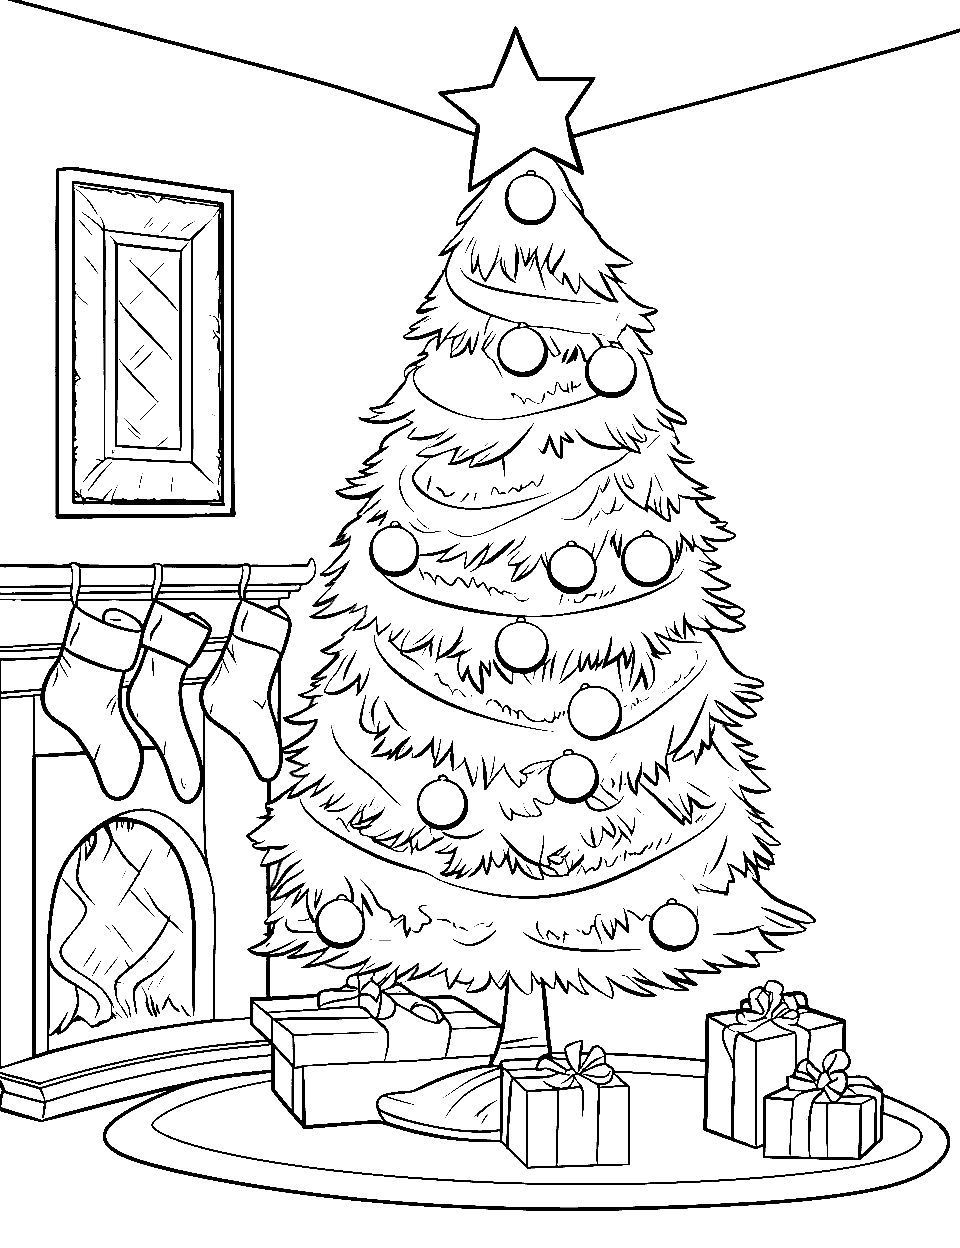 Warm Fireplace and Christmas Tree Coloring Page - A cozy scene with stockings hanging on the fireplace next to a glowing Christmas tree.